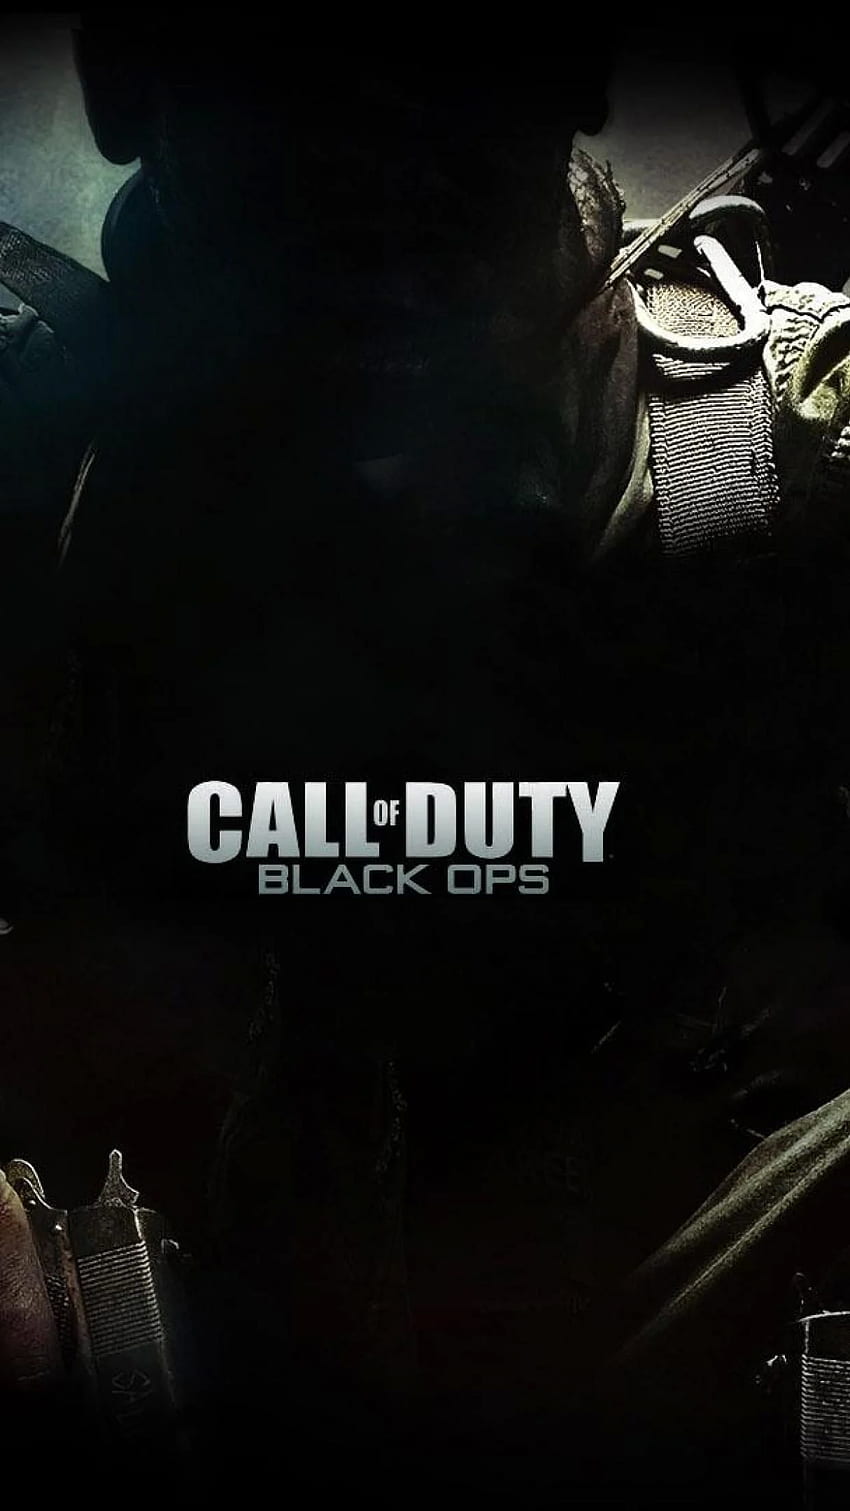 Call of duty black ops mobile - call of duty black ops HD phone wallpaper |  Pxfuel